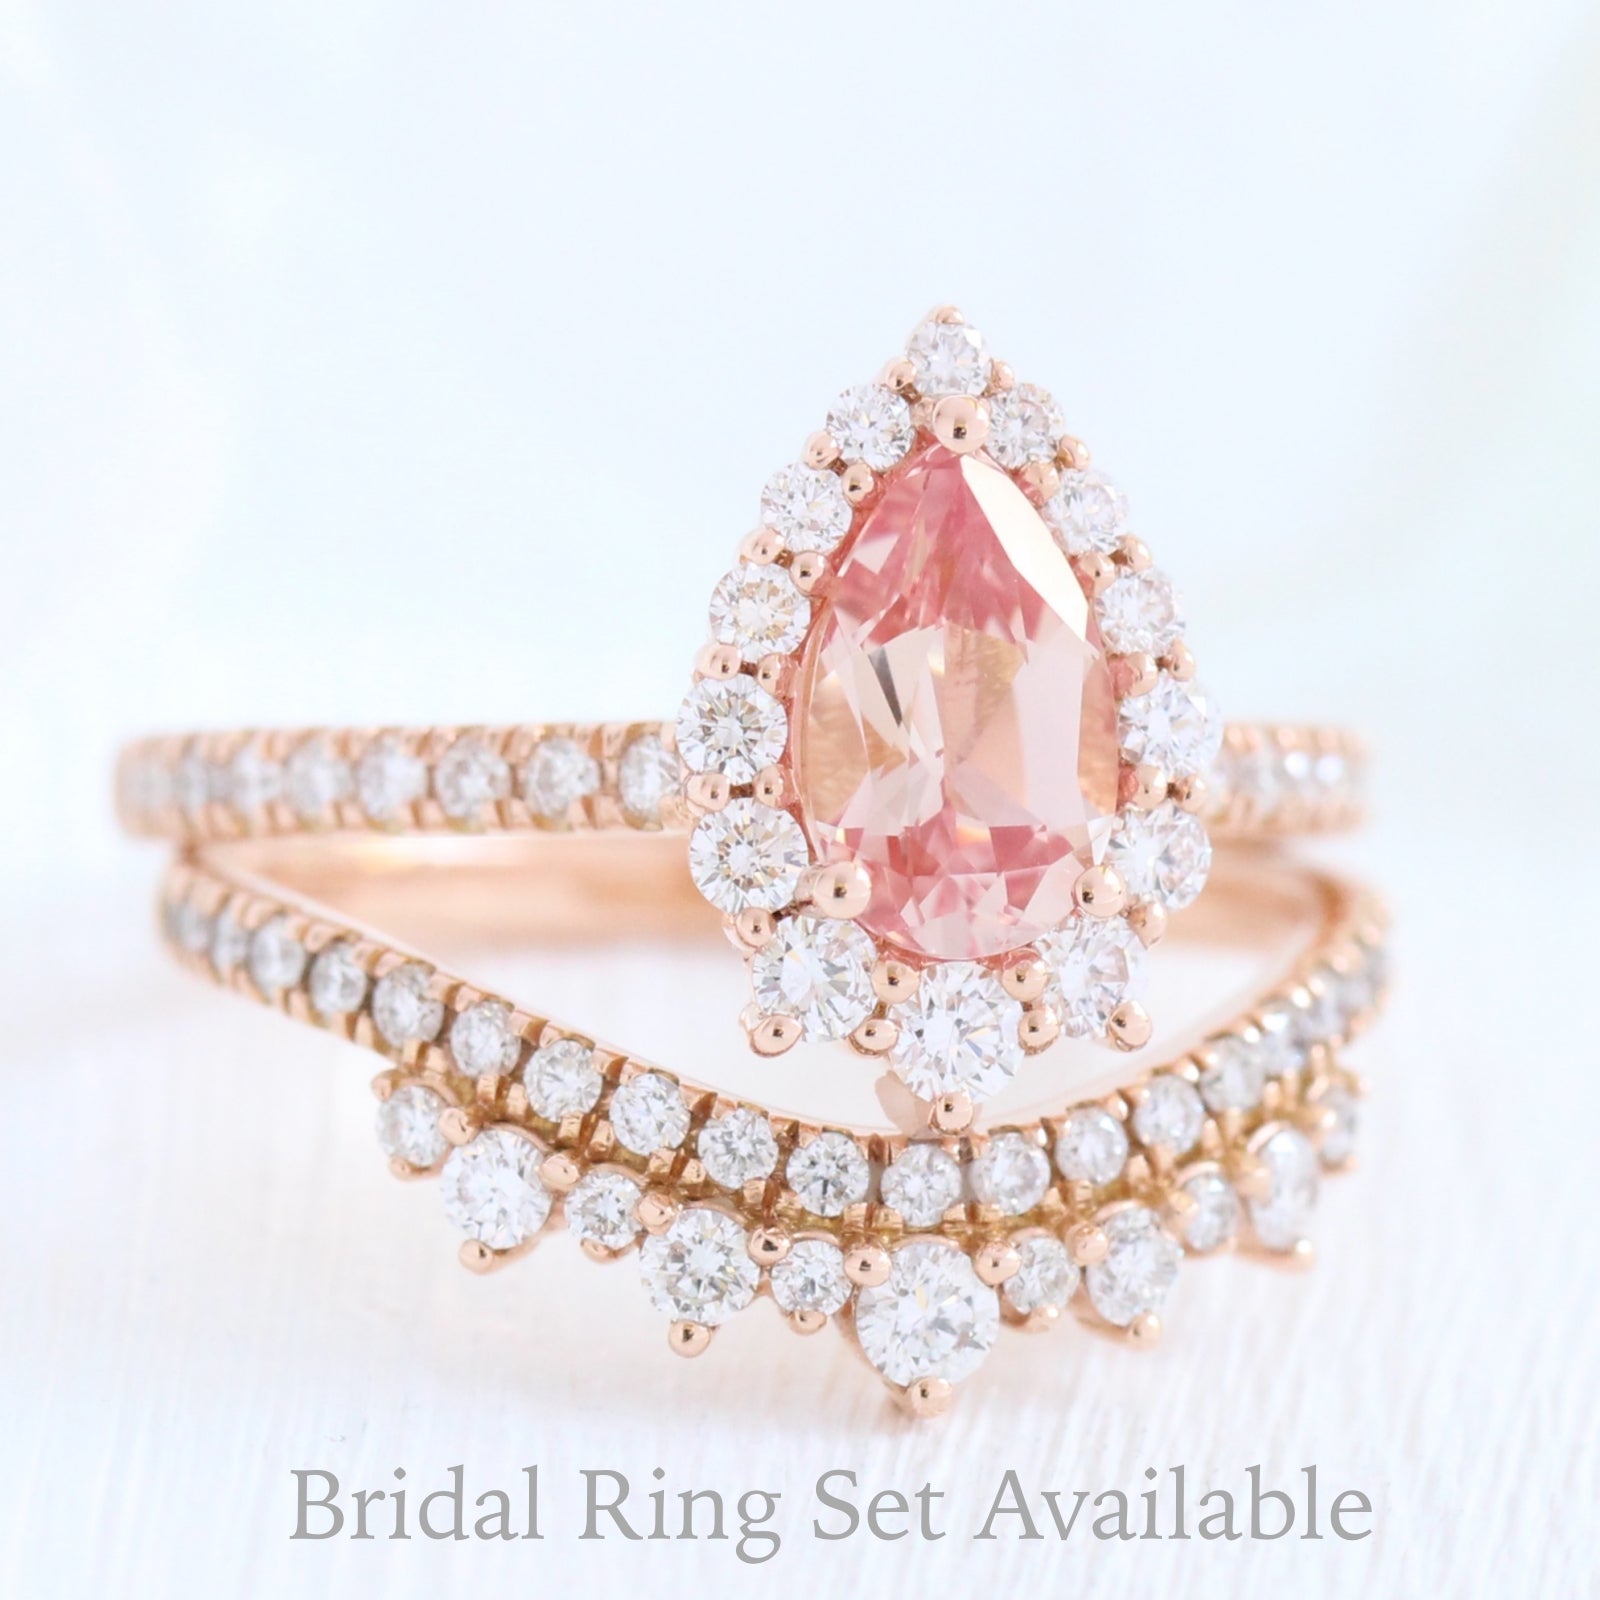 pear shaped peach sapphire engagement ring rose gold and curved crown diamond wedding band by la more design jewelry